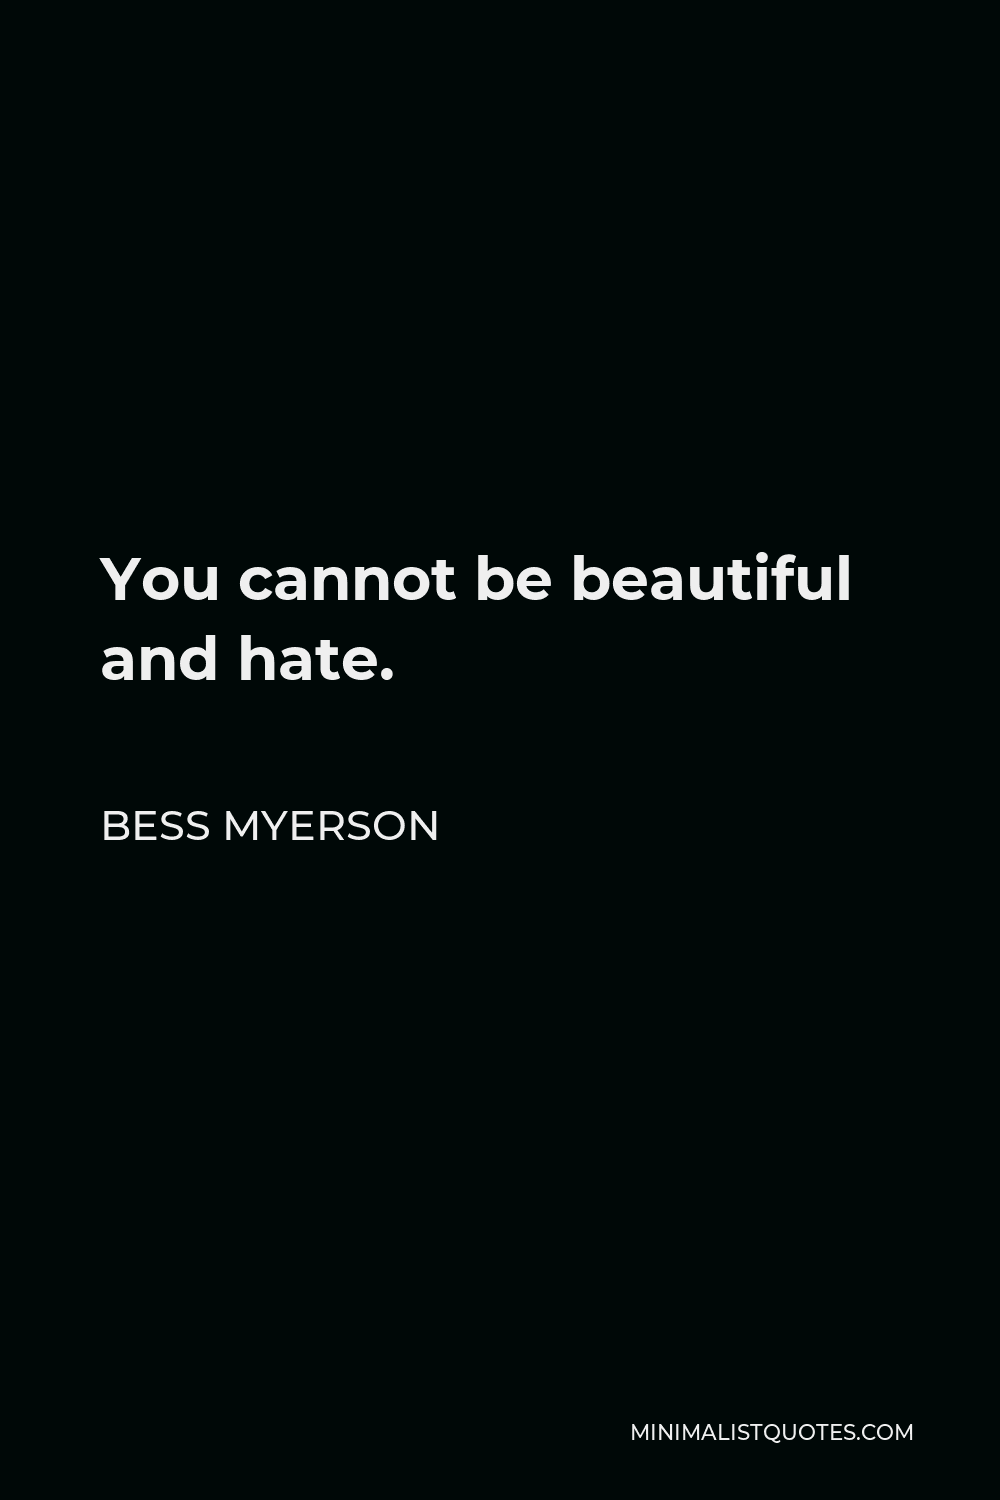 Bess Myerson Quote - You cannot be beautiful and hate.